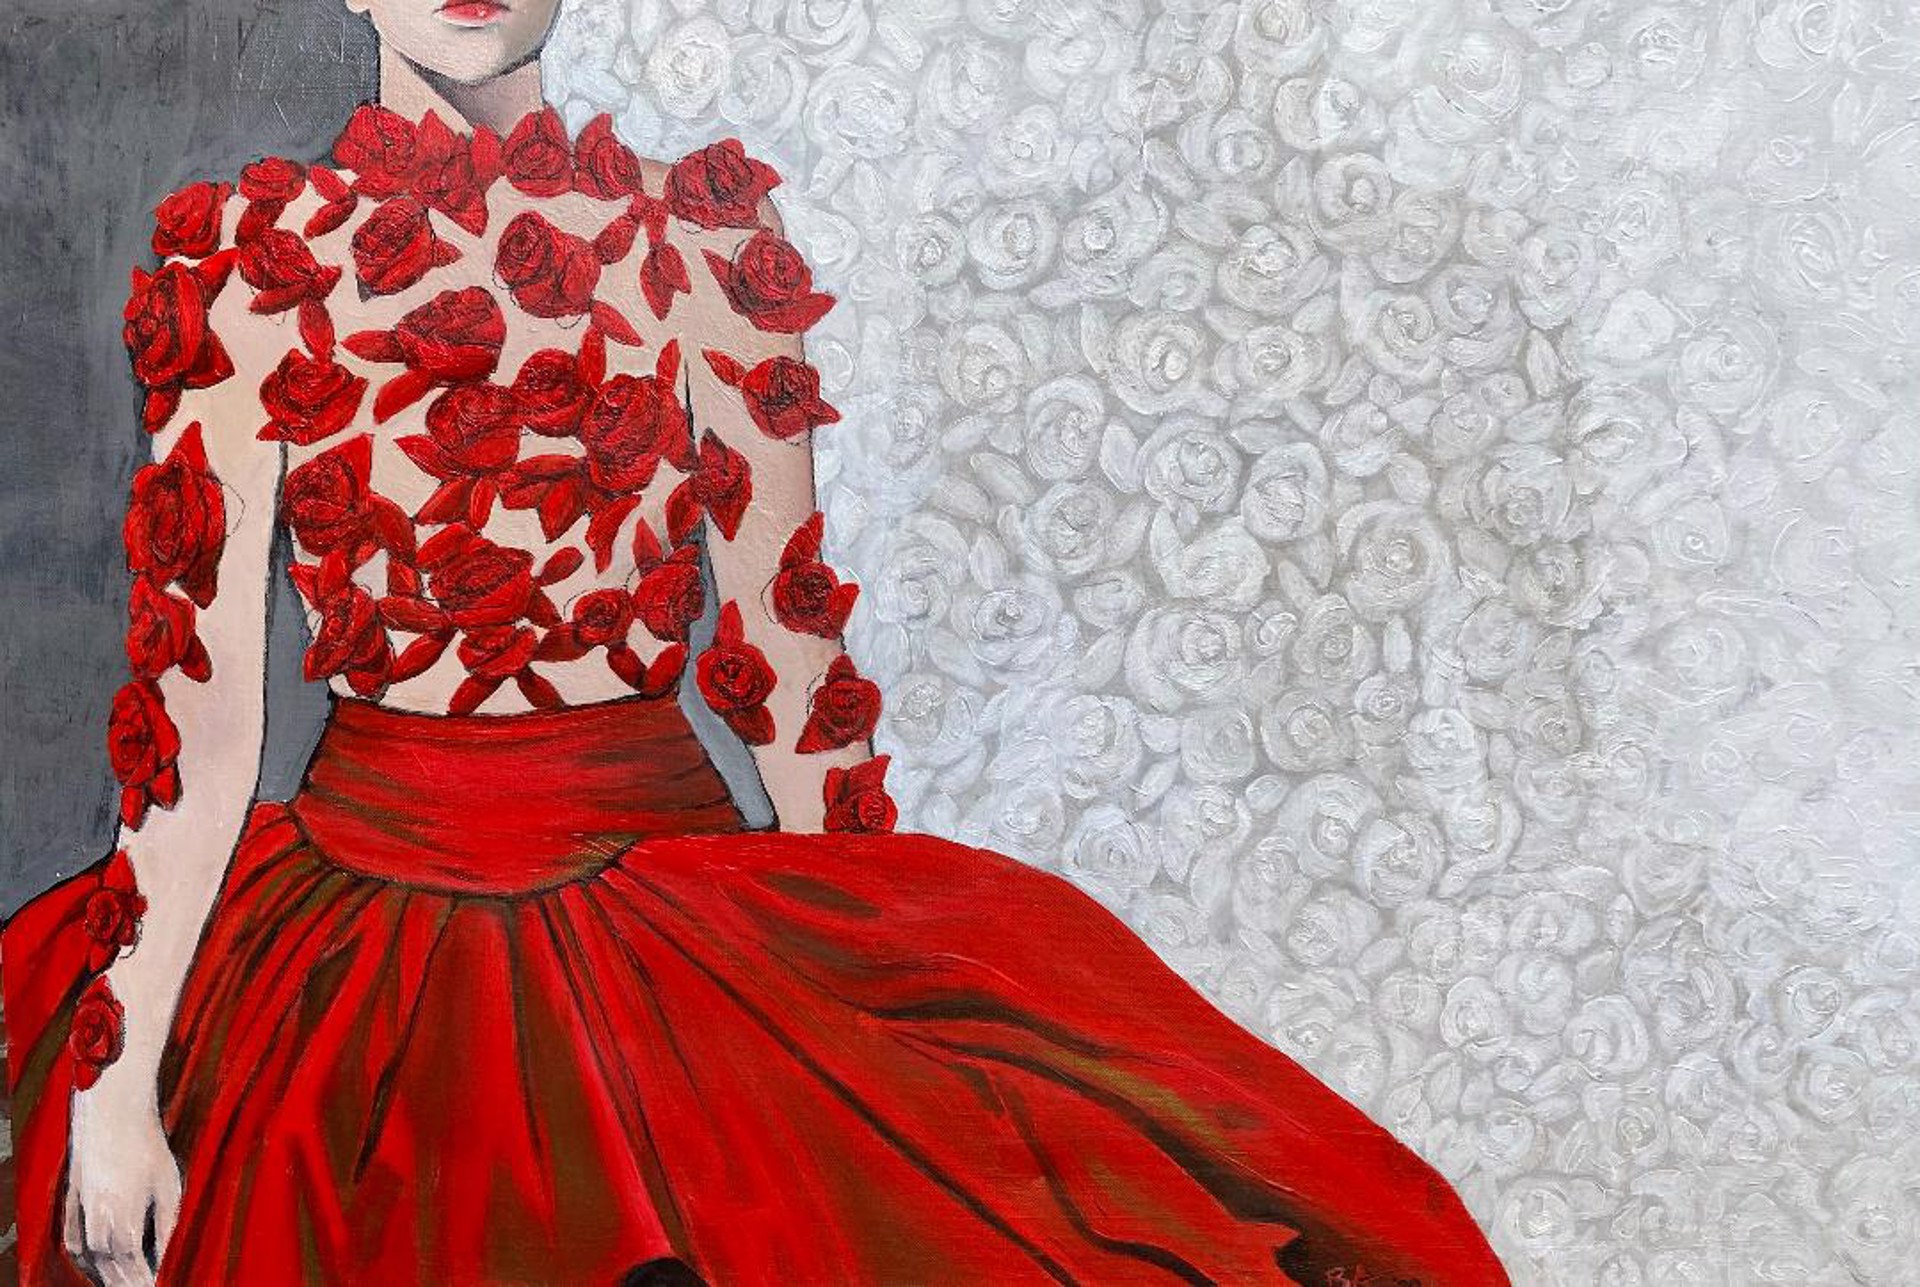 The Rose Dress by Beth Aronoff